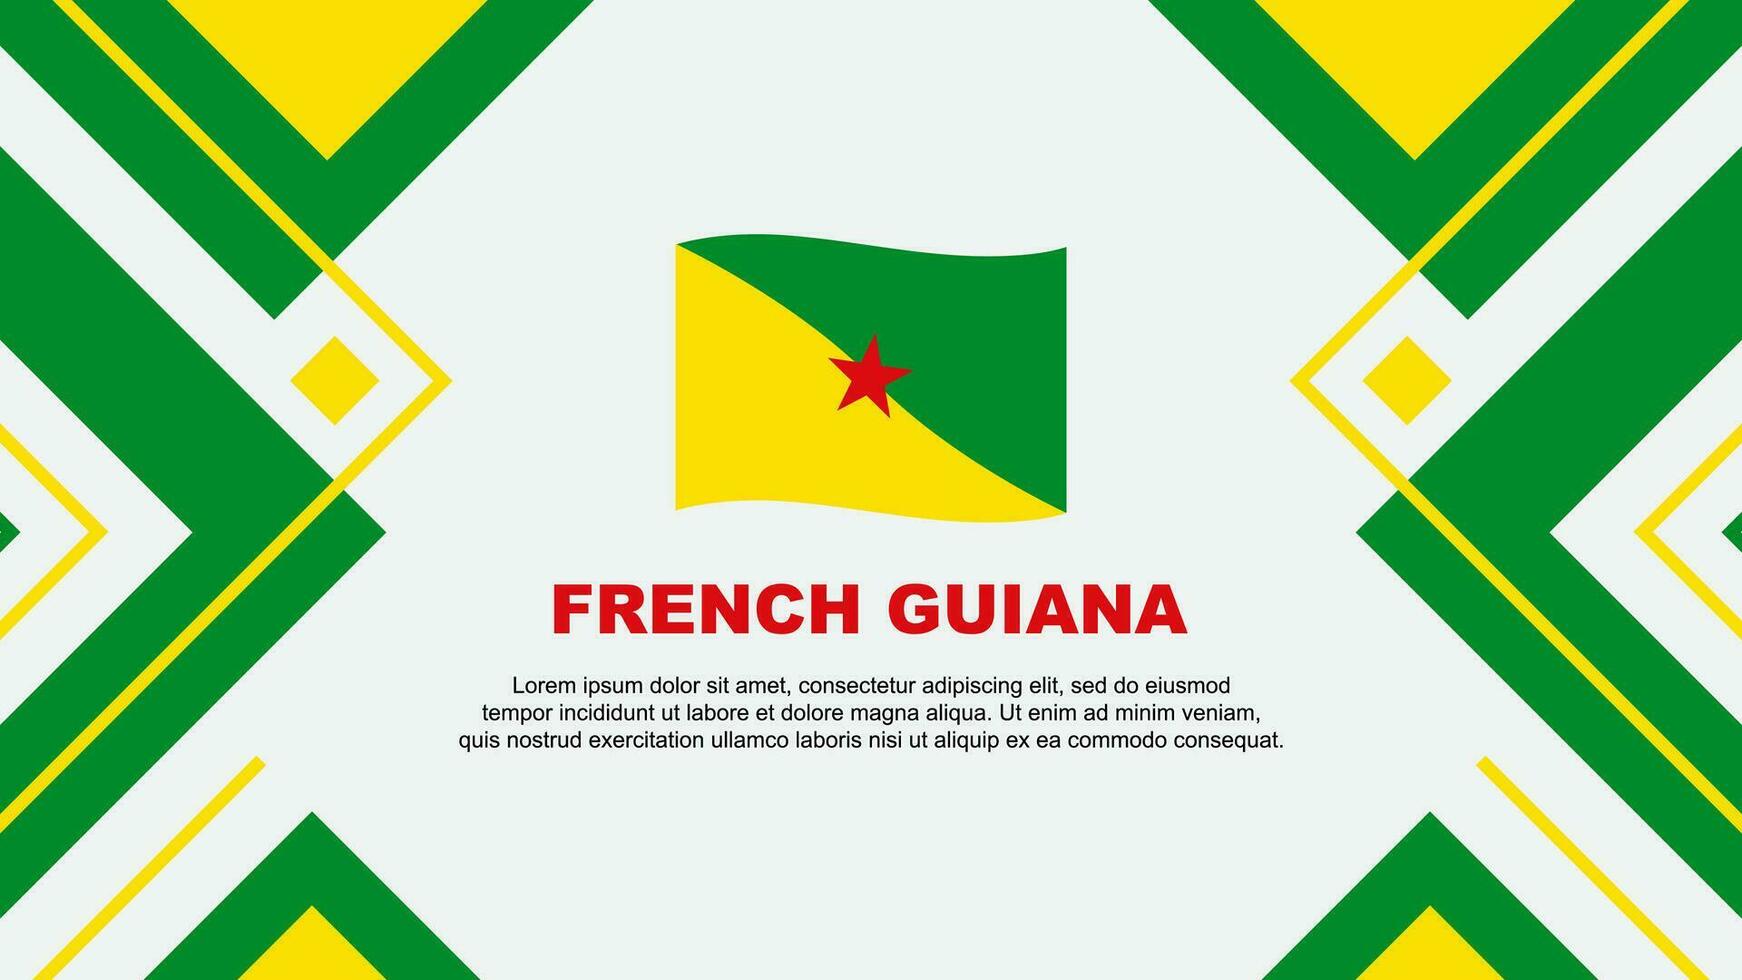 French Guiana Flag Abstract Background Design Template. French Guiana Independence Day Banner Wallpaper Vector Illustration. French Guiana Illustration